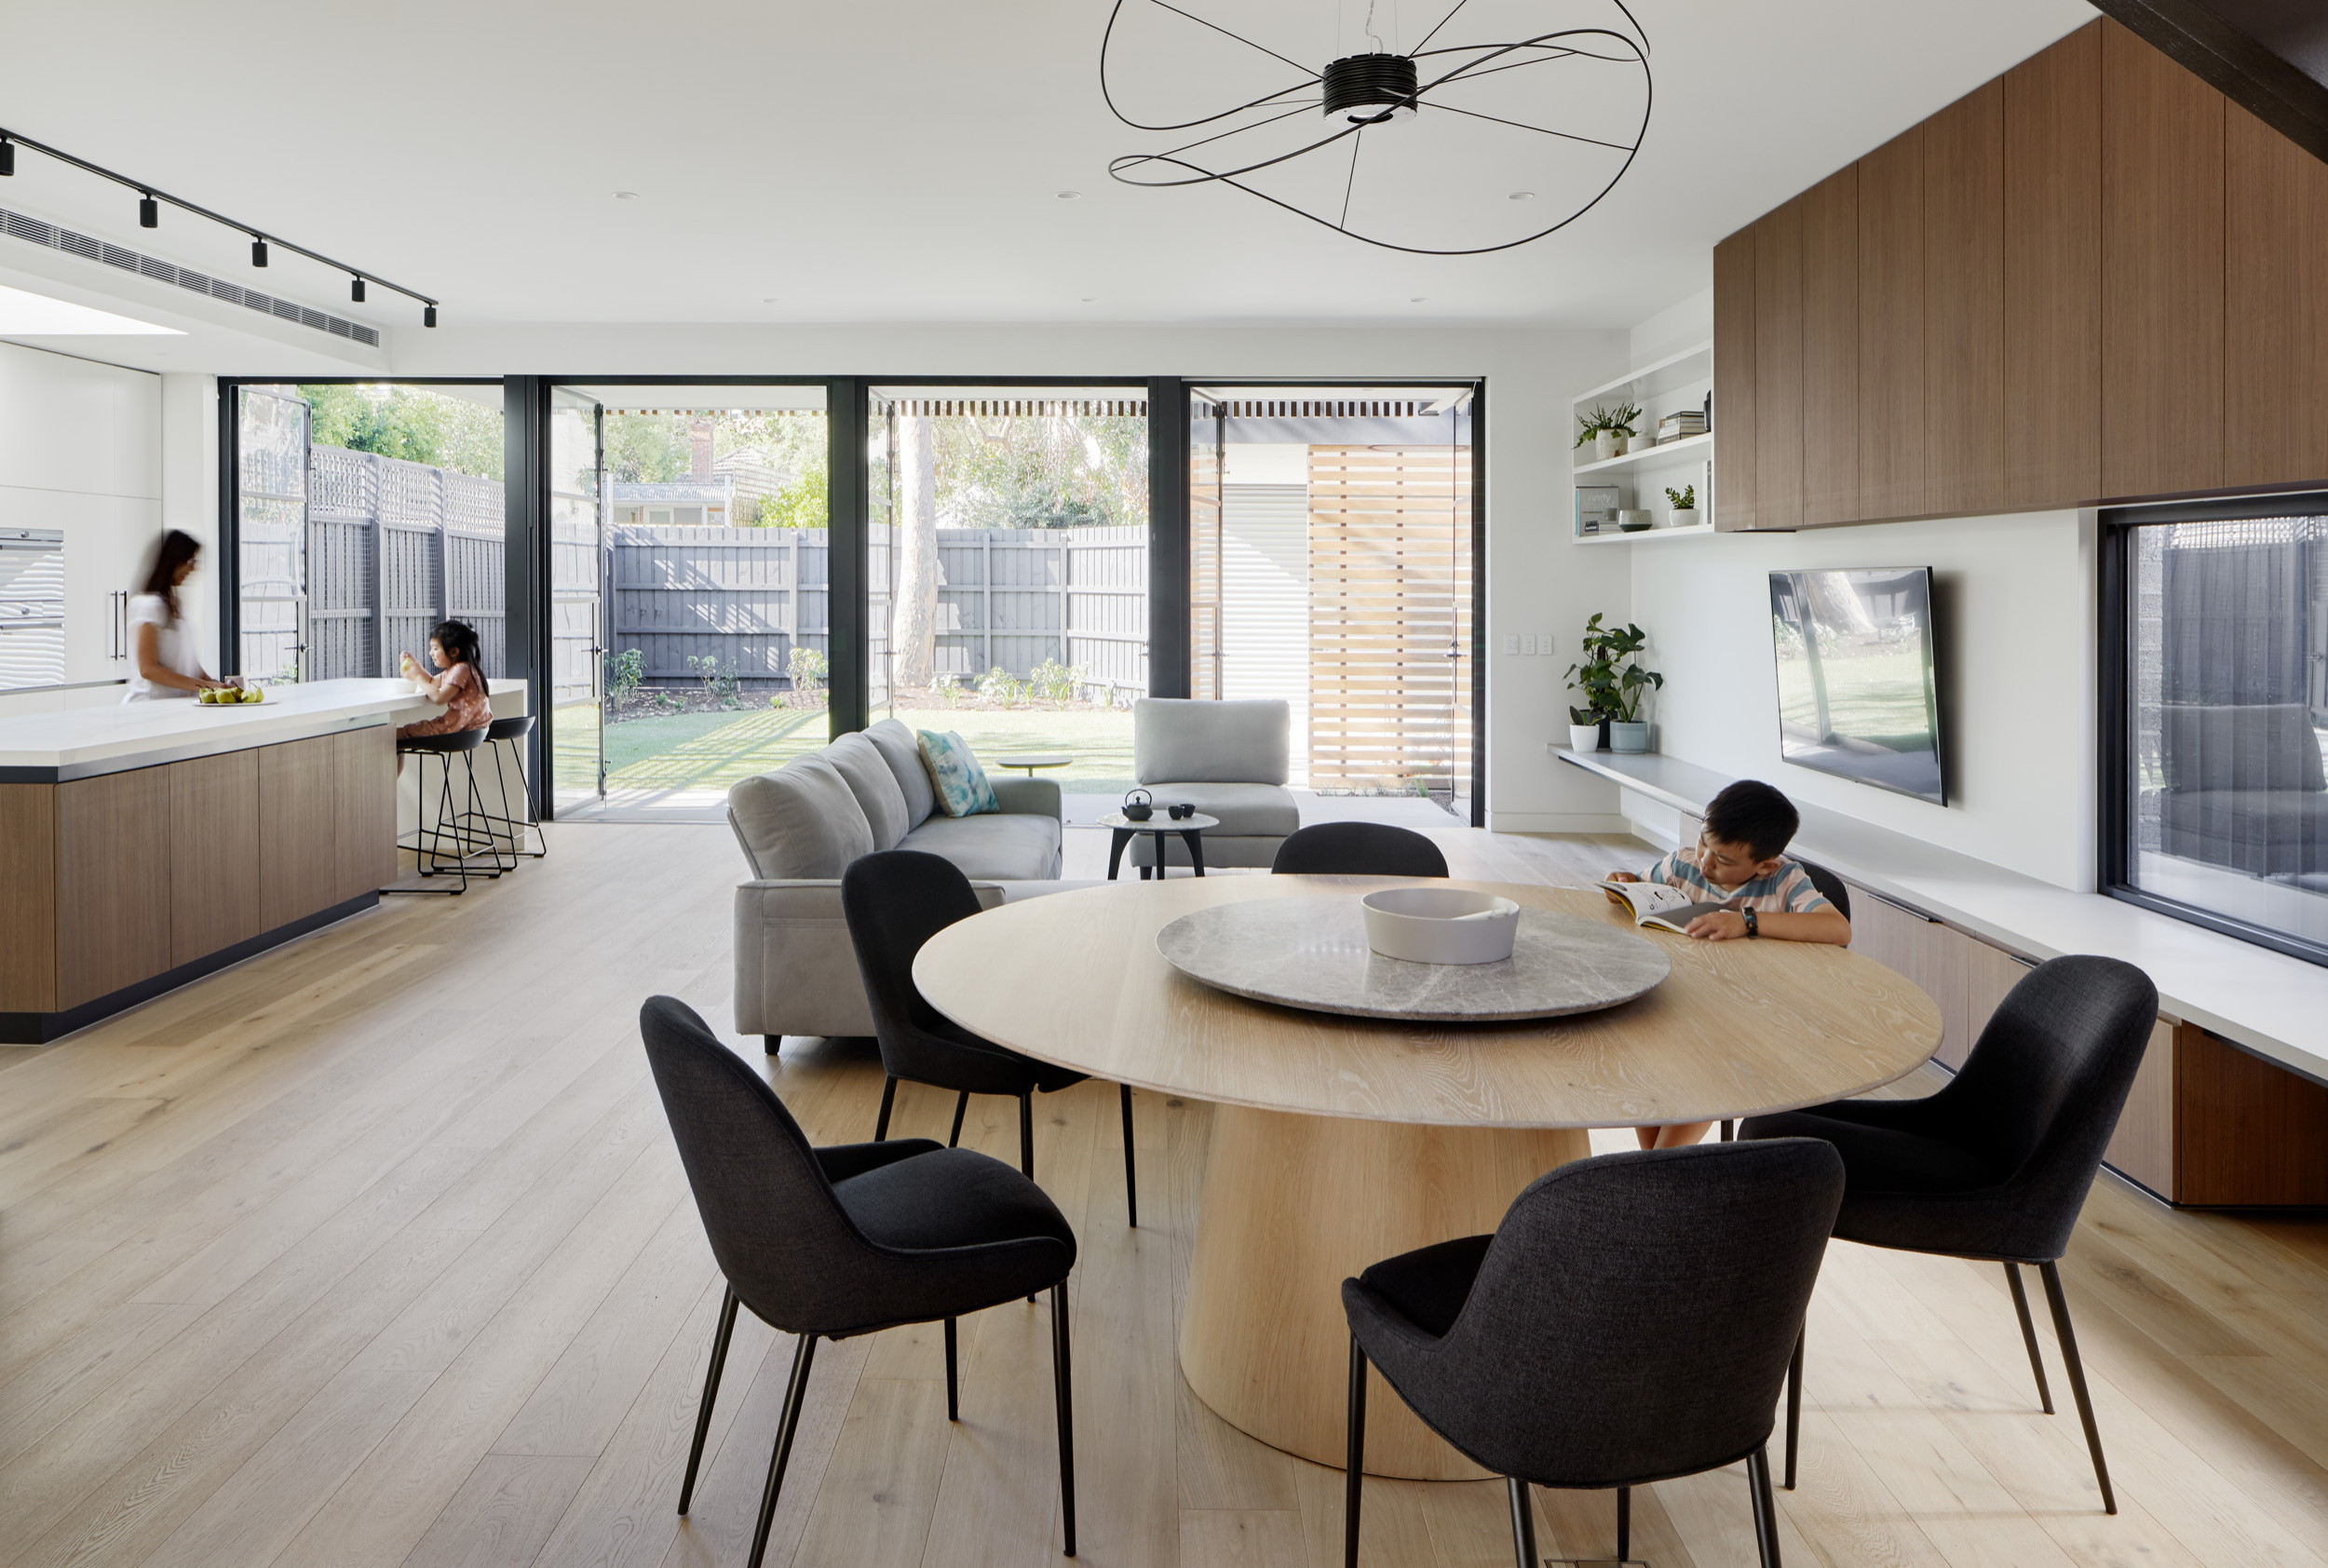 75 Beautiful Modern Dining Room Pictures Ideas February 2021 Houzz